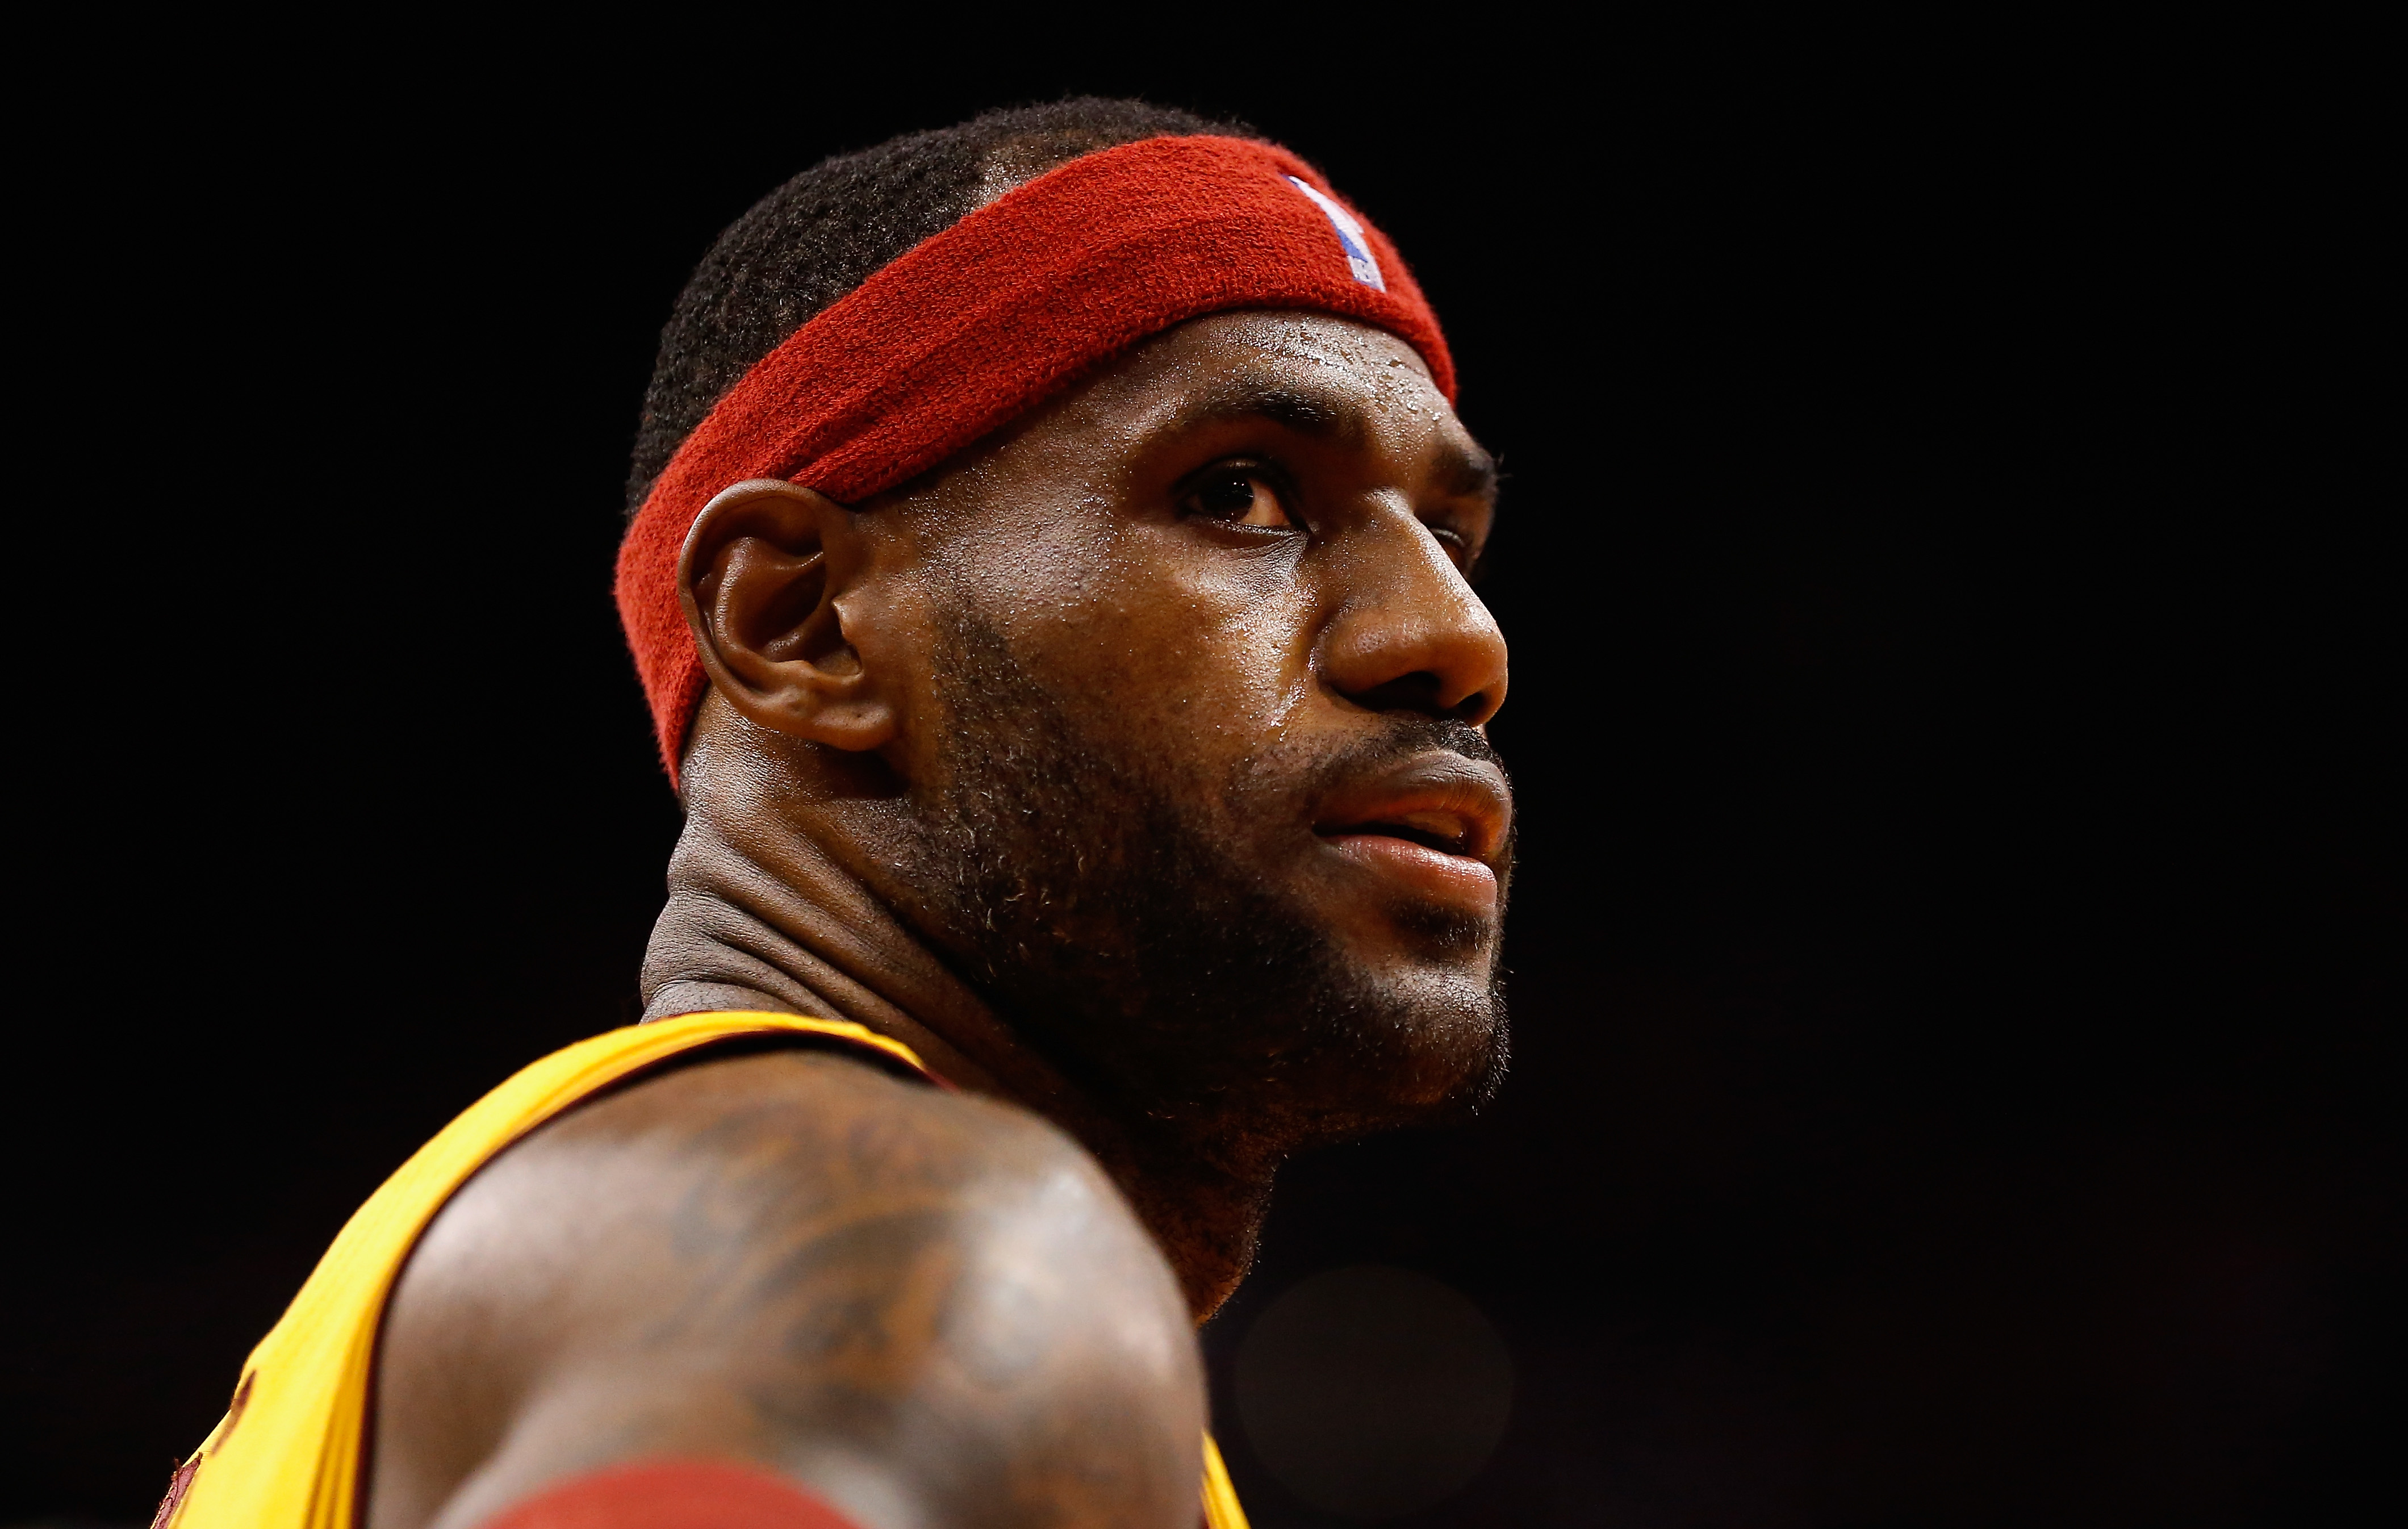 LeBron James of the Cleveland Cavaliers at the NBA game against the Phoenix Suns in Phoenix on Jan. 13, 2015. (Christian Petersen—Getty Images)